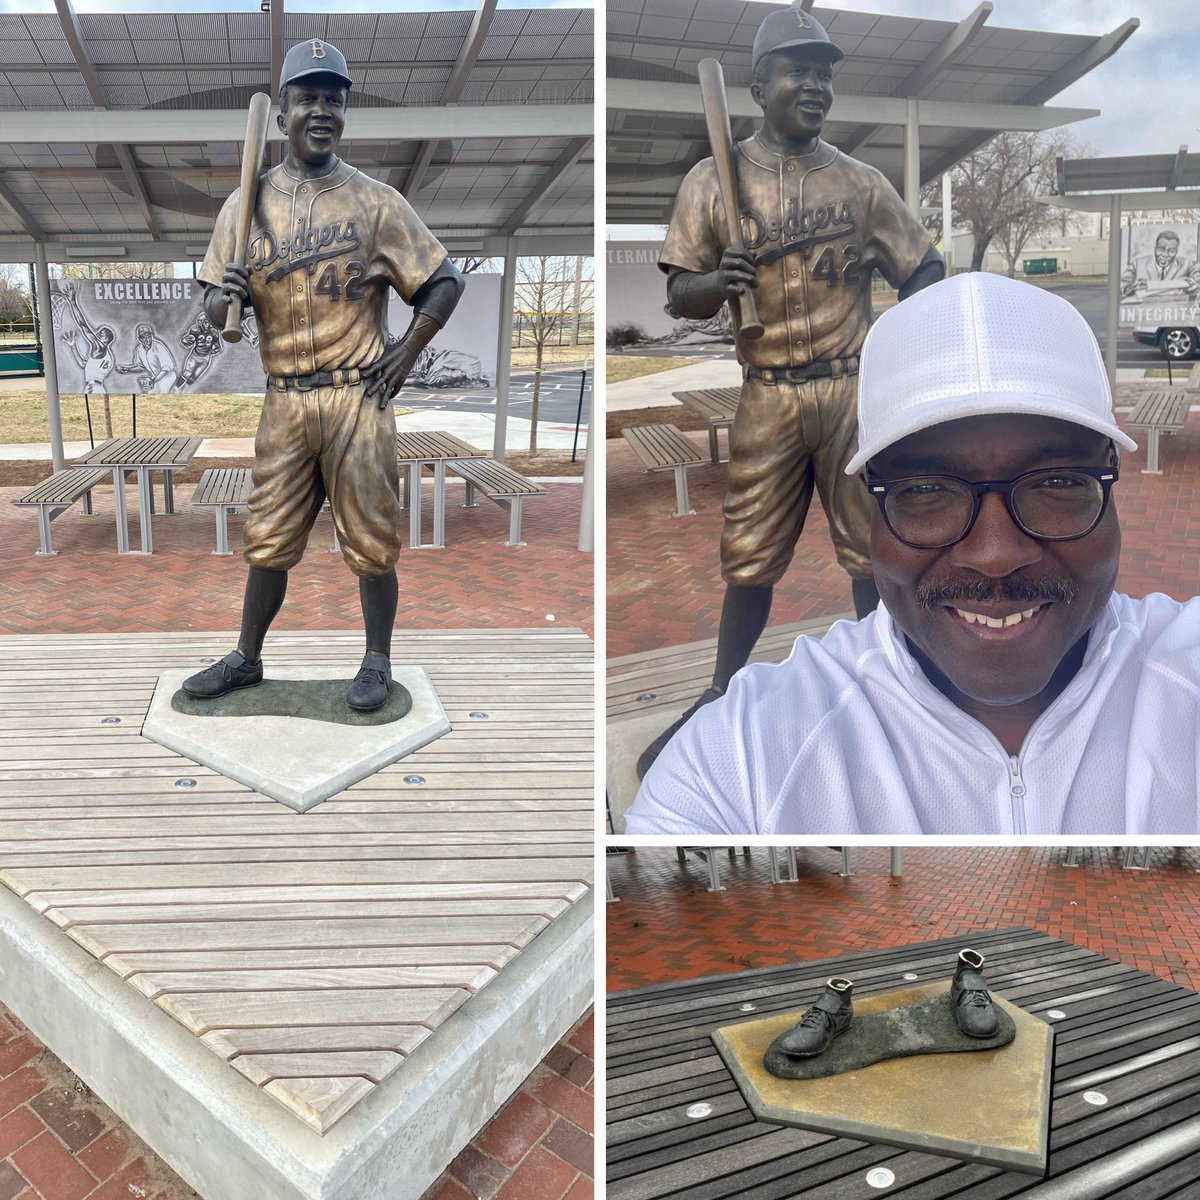 Absolutely heartbroken for my friends at League 42 in Wichita after the heinous destruction & theft of their beautiful Jackie Robinson statue that welcomed kids and fans to the baseball complex! I was in Wichita to support a fundraising event for League 42 in April 2022! @KSNNews